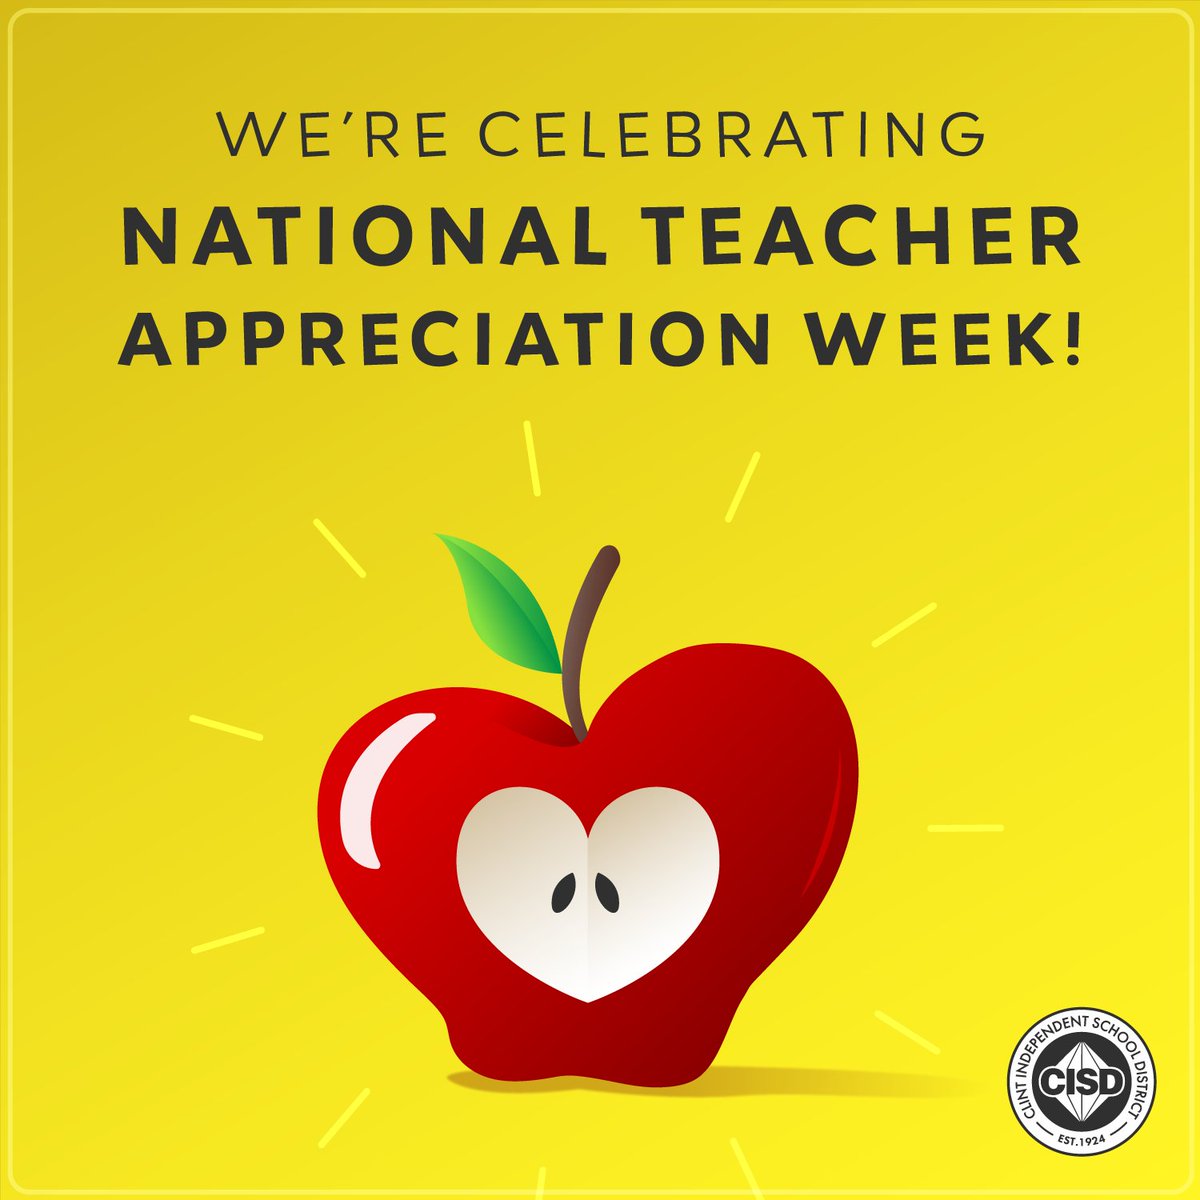 It's National Teacher Appreciation Week! ❤️ Let's give a HUGE shoutout to all the amazing teachers out there who inspire, support, and shape our futures. You rock! 🚀 🍎 
#TeacherAppreciationWeek #ThankATeacher #WeAreClintISD